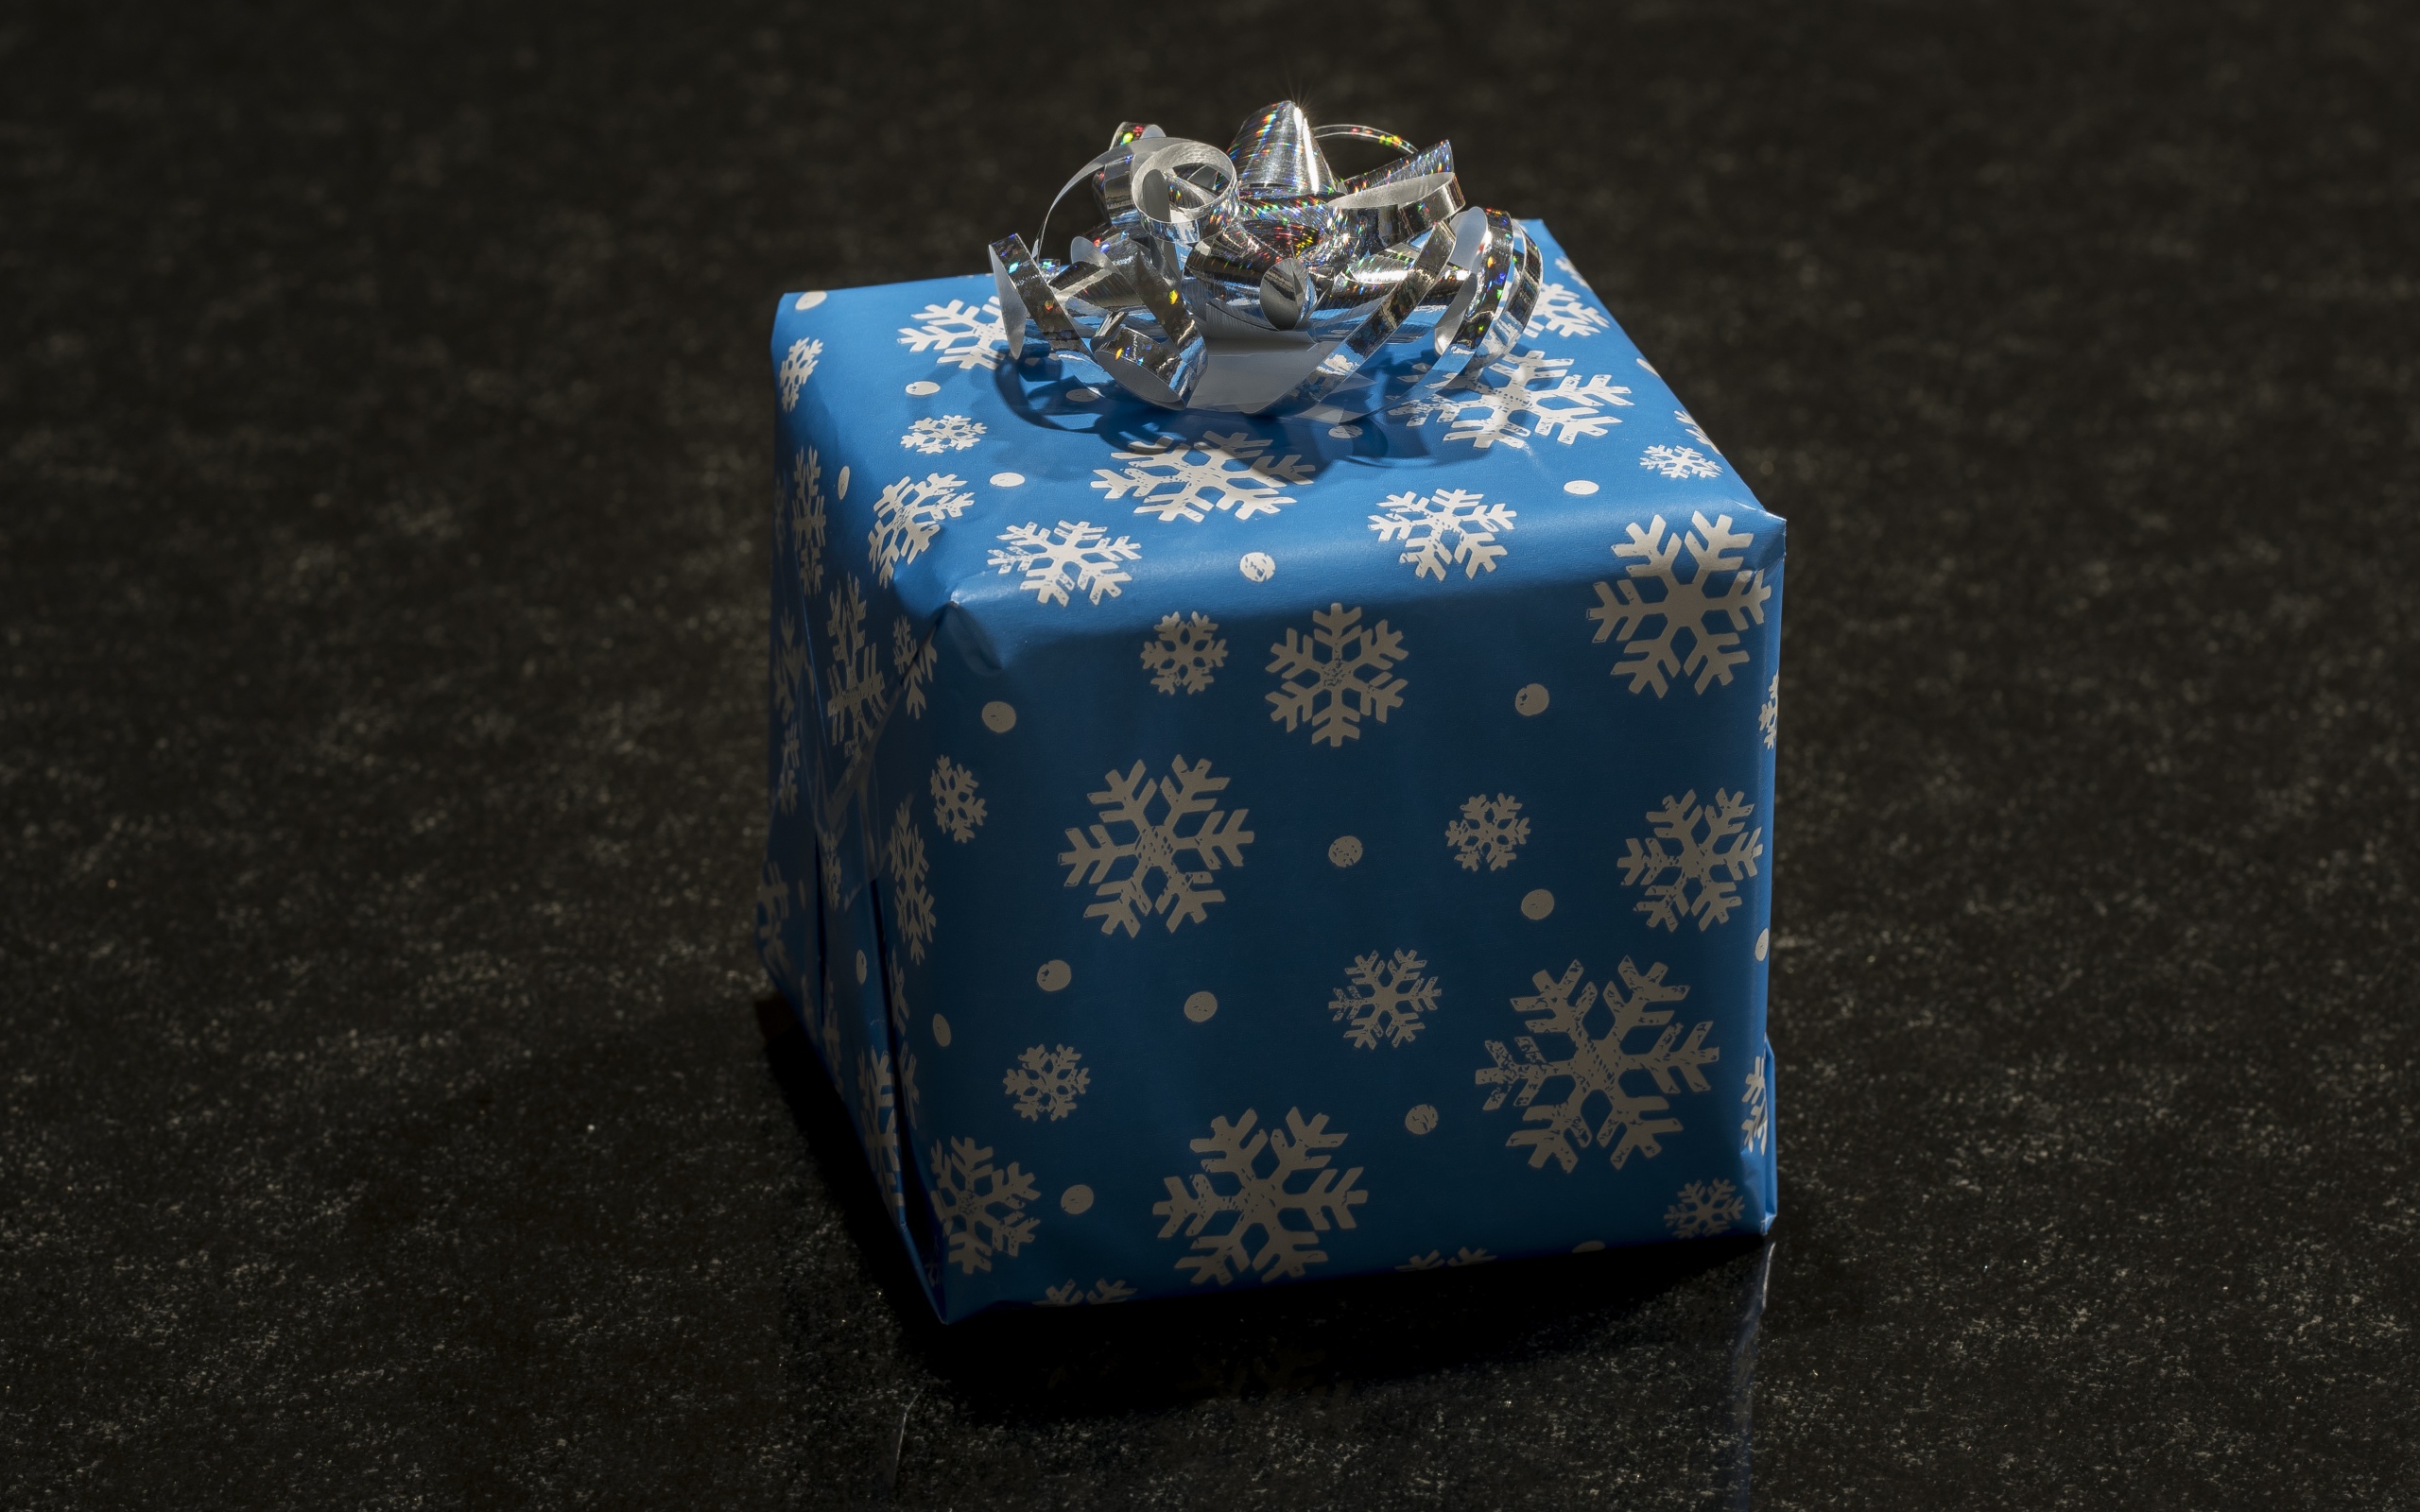 Big blue gift with bow on black background